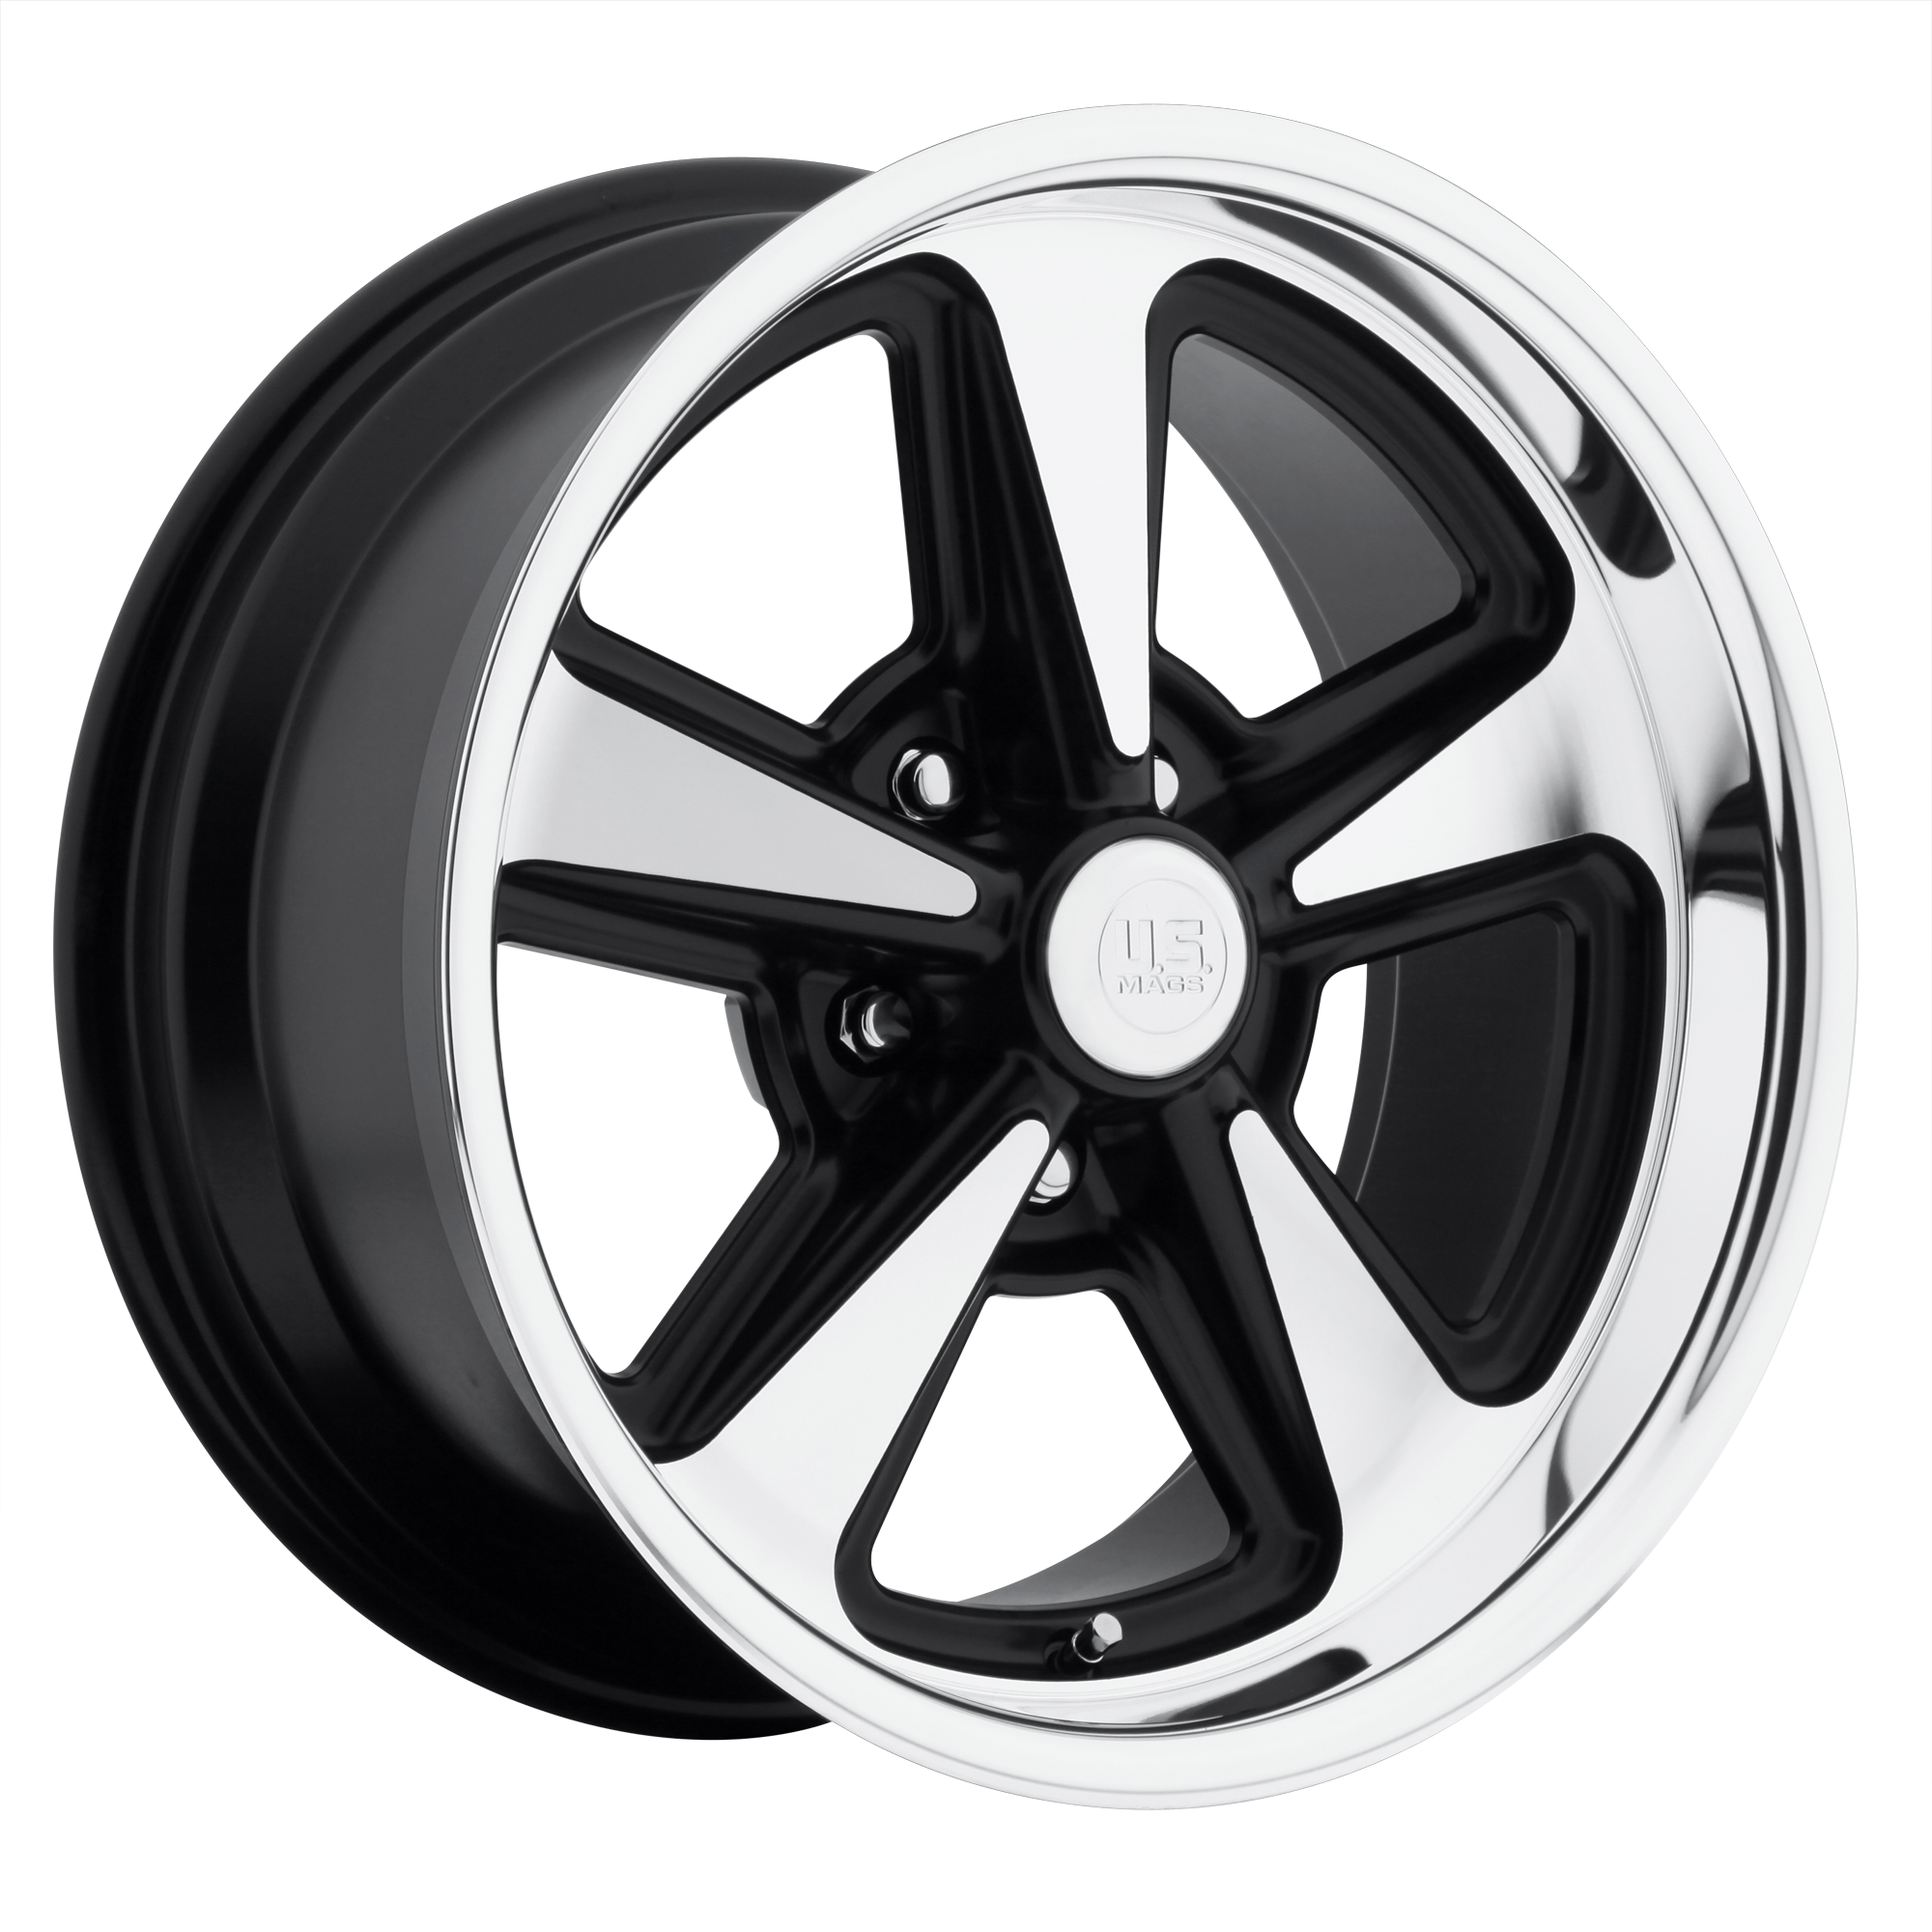 BANDIT 17x8 5x120.65 MATTE BLACK MACHINED (1 mm) - Tires and Engine Performance